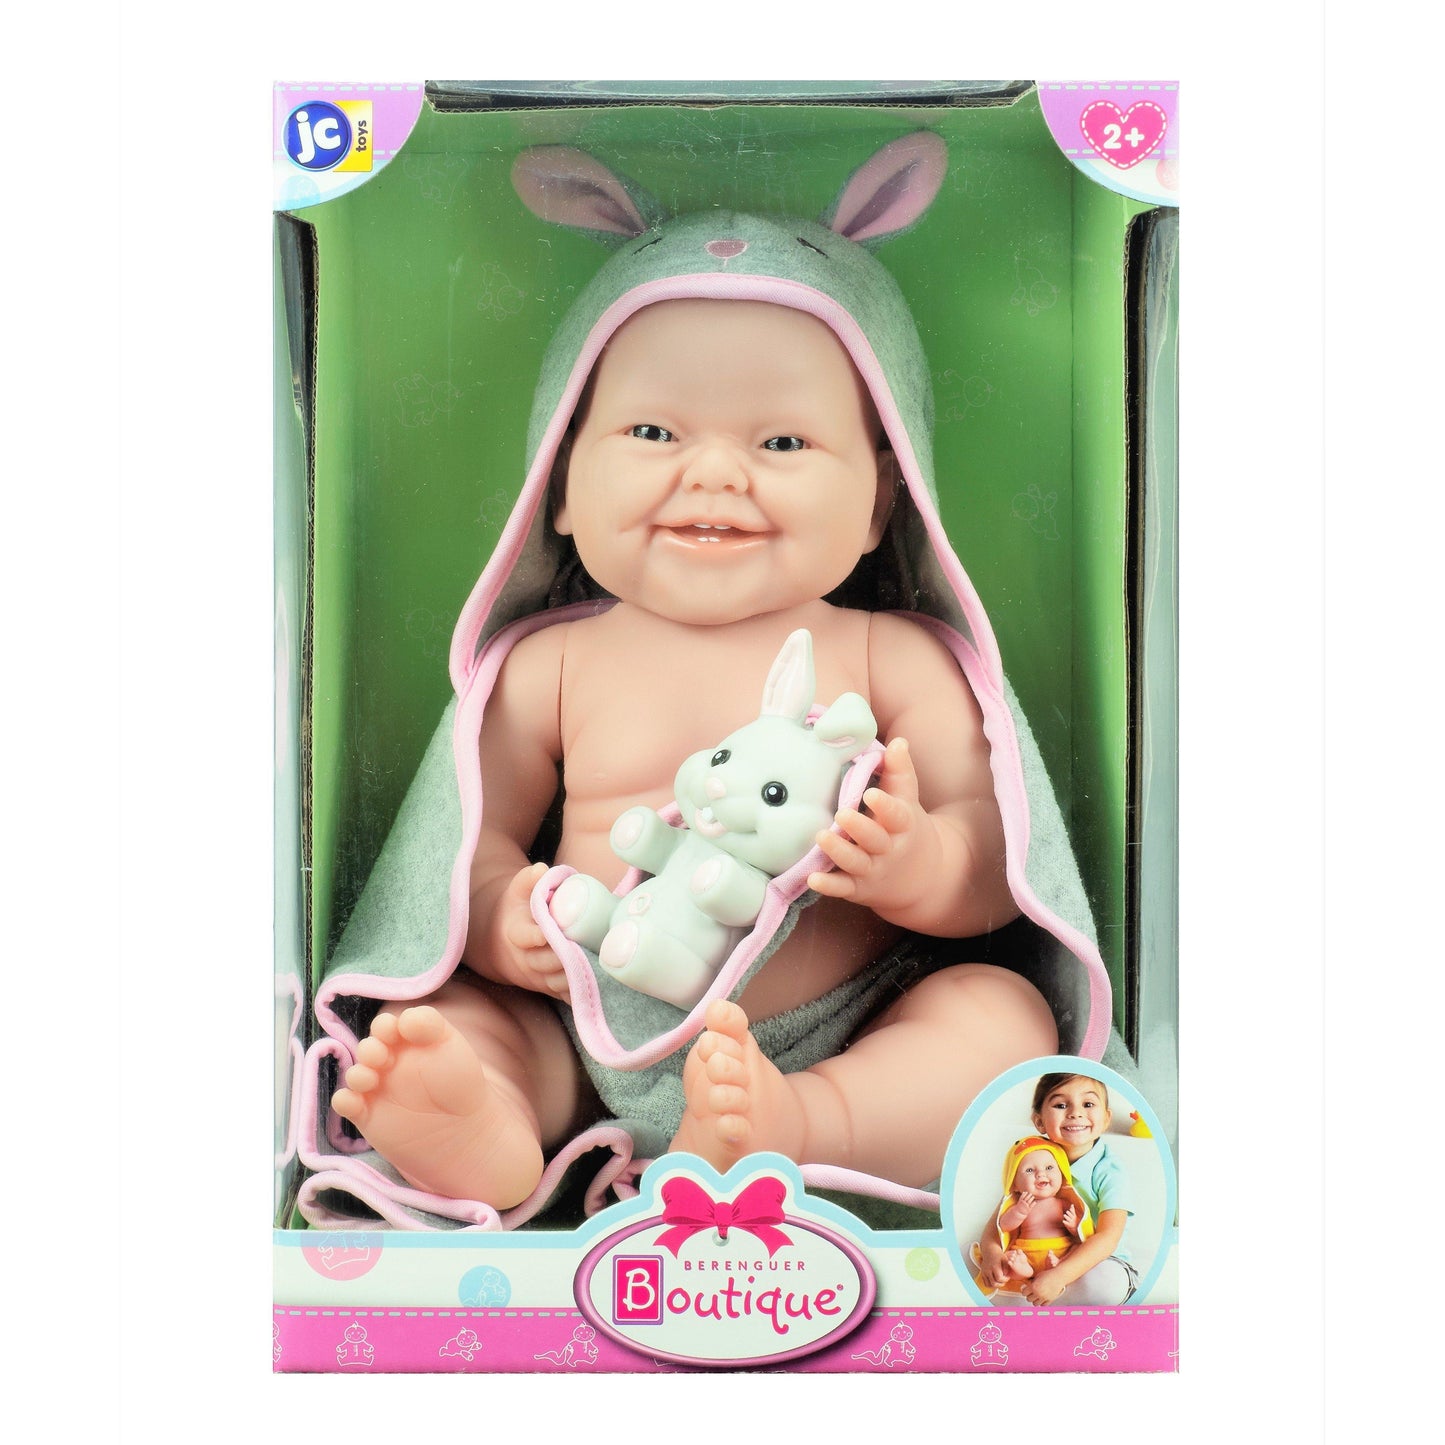 JC Toys, La Newborn Baby Doll, All Vinyl Realistic 17" Anatomically Correct Real Girl, with Hooded Rabbit Towel - JC Toys Group Inc.